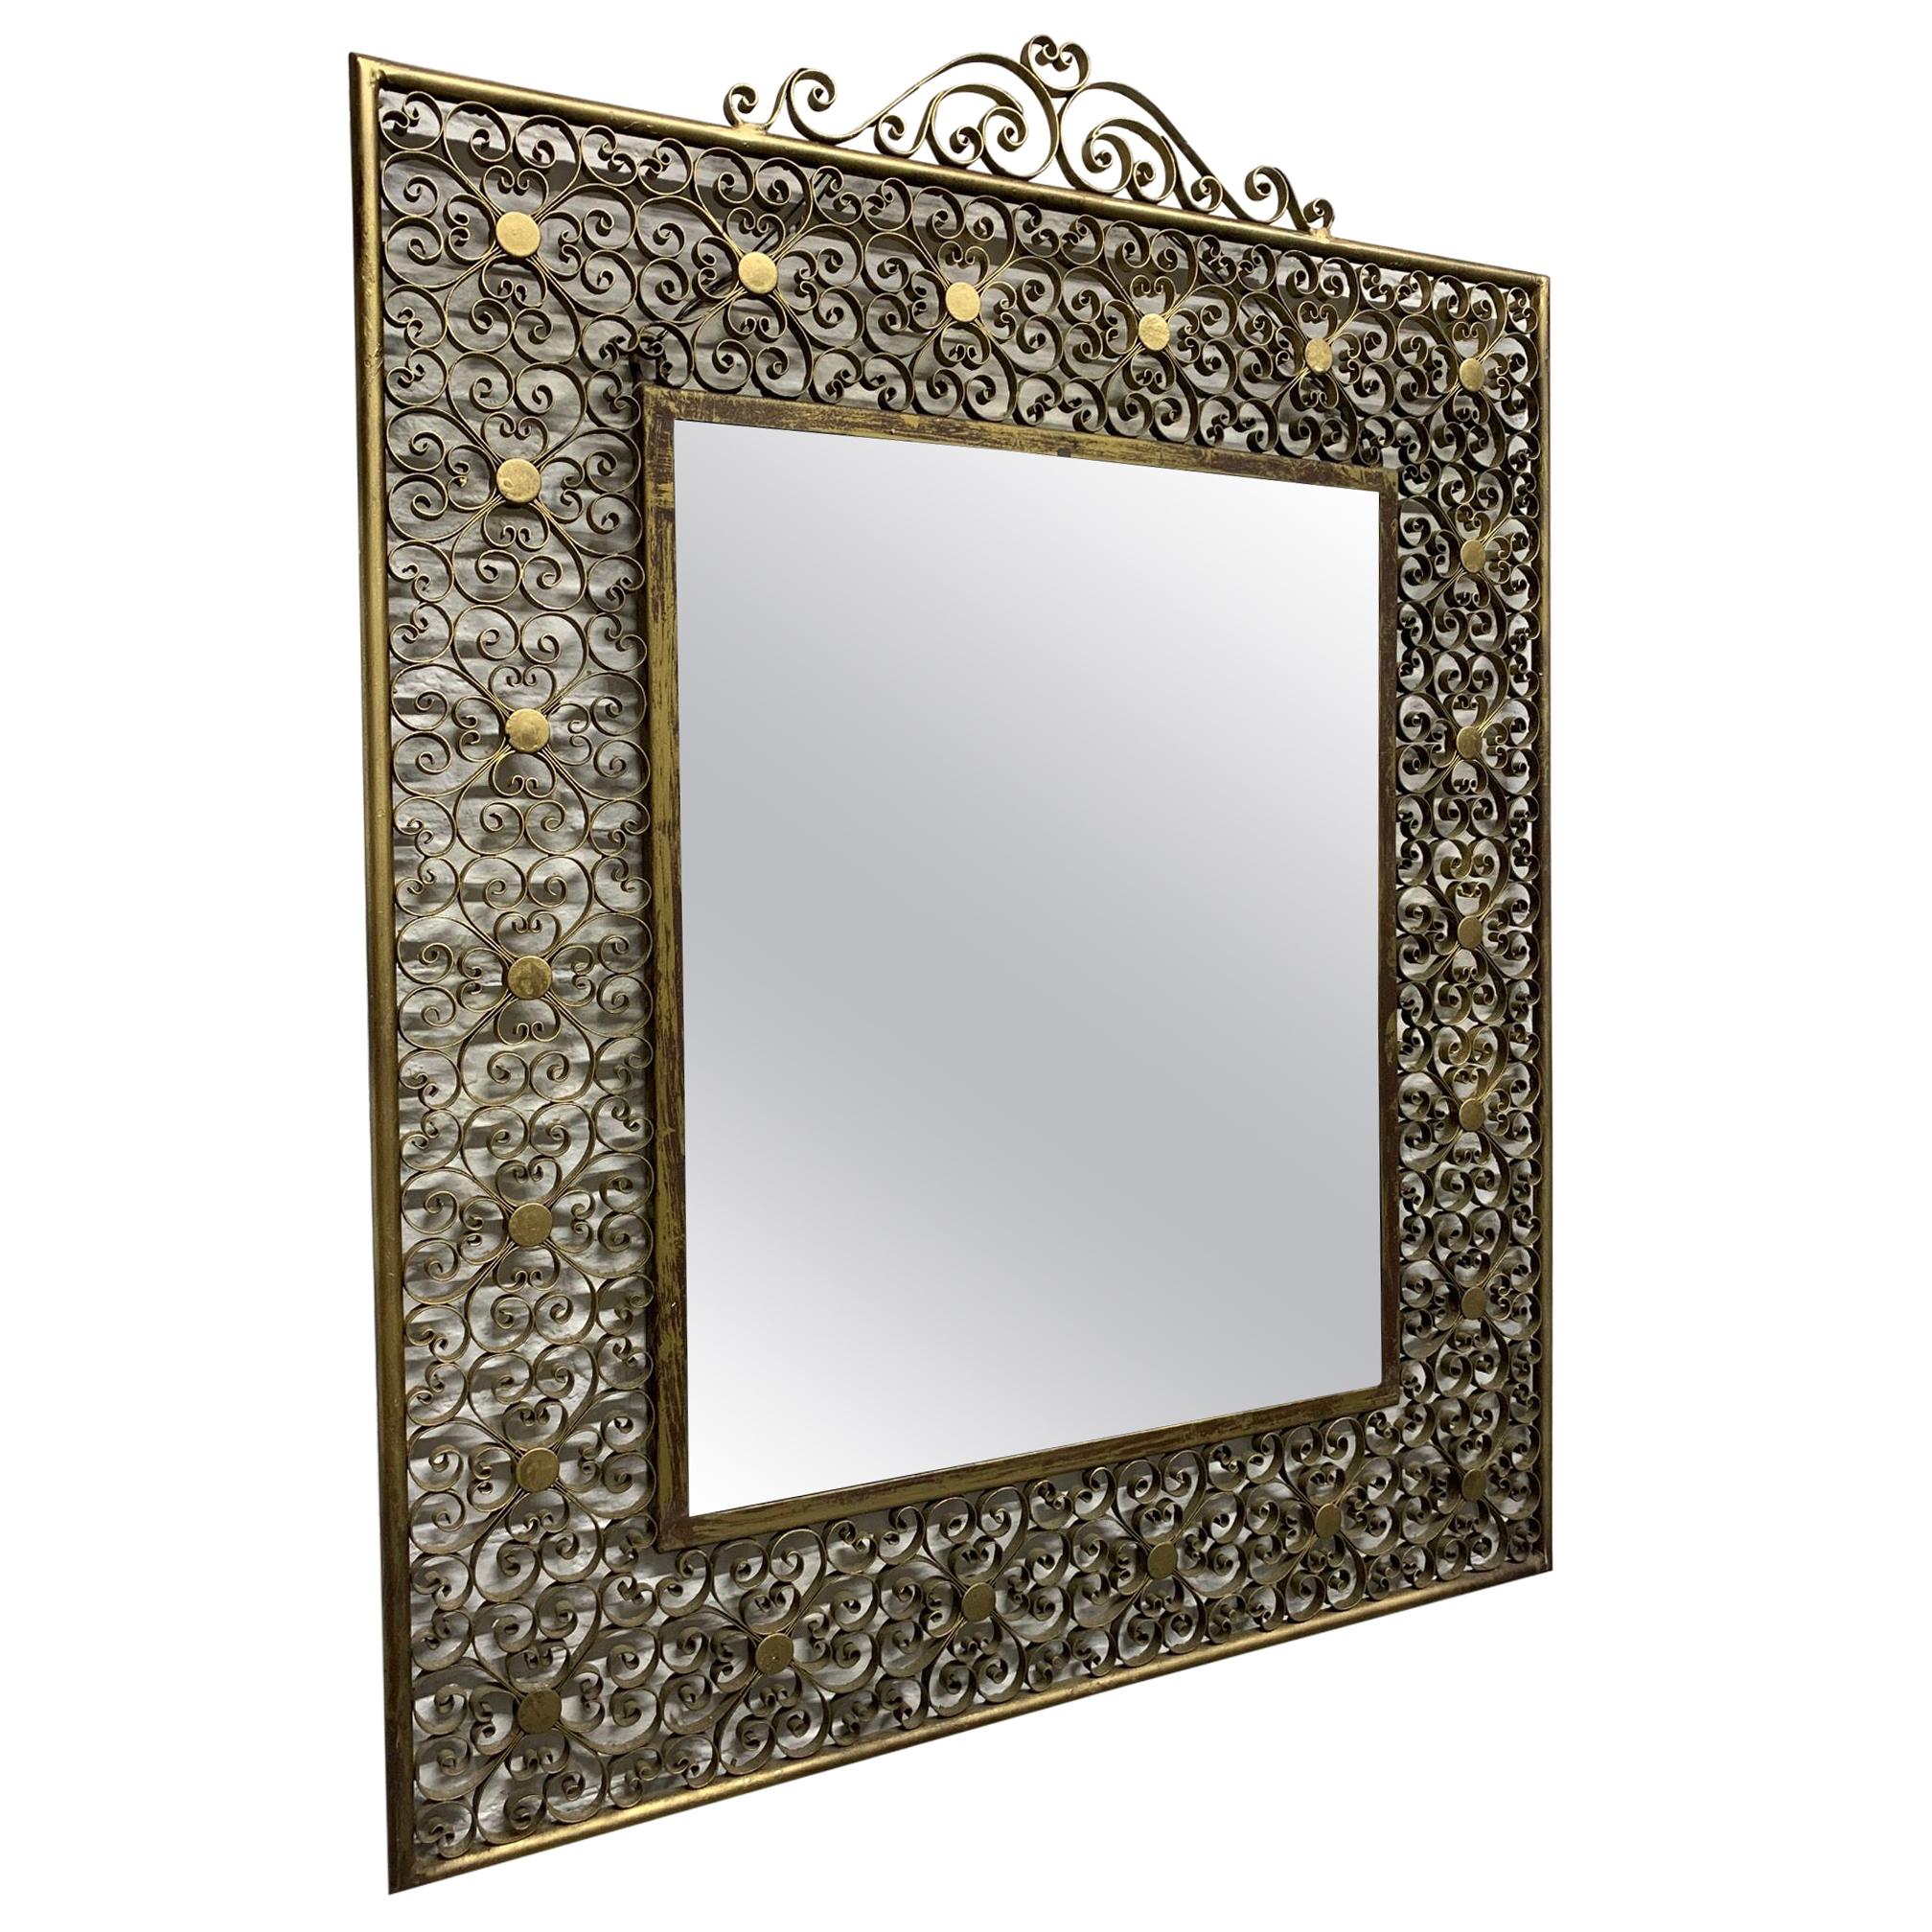 1920s Mirror Attributed to Oscar Bach For Sale